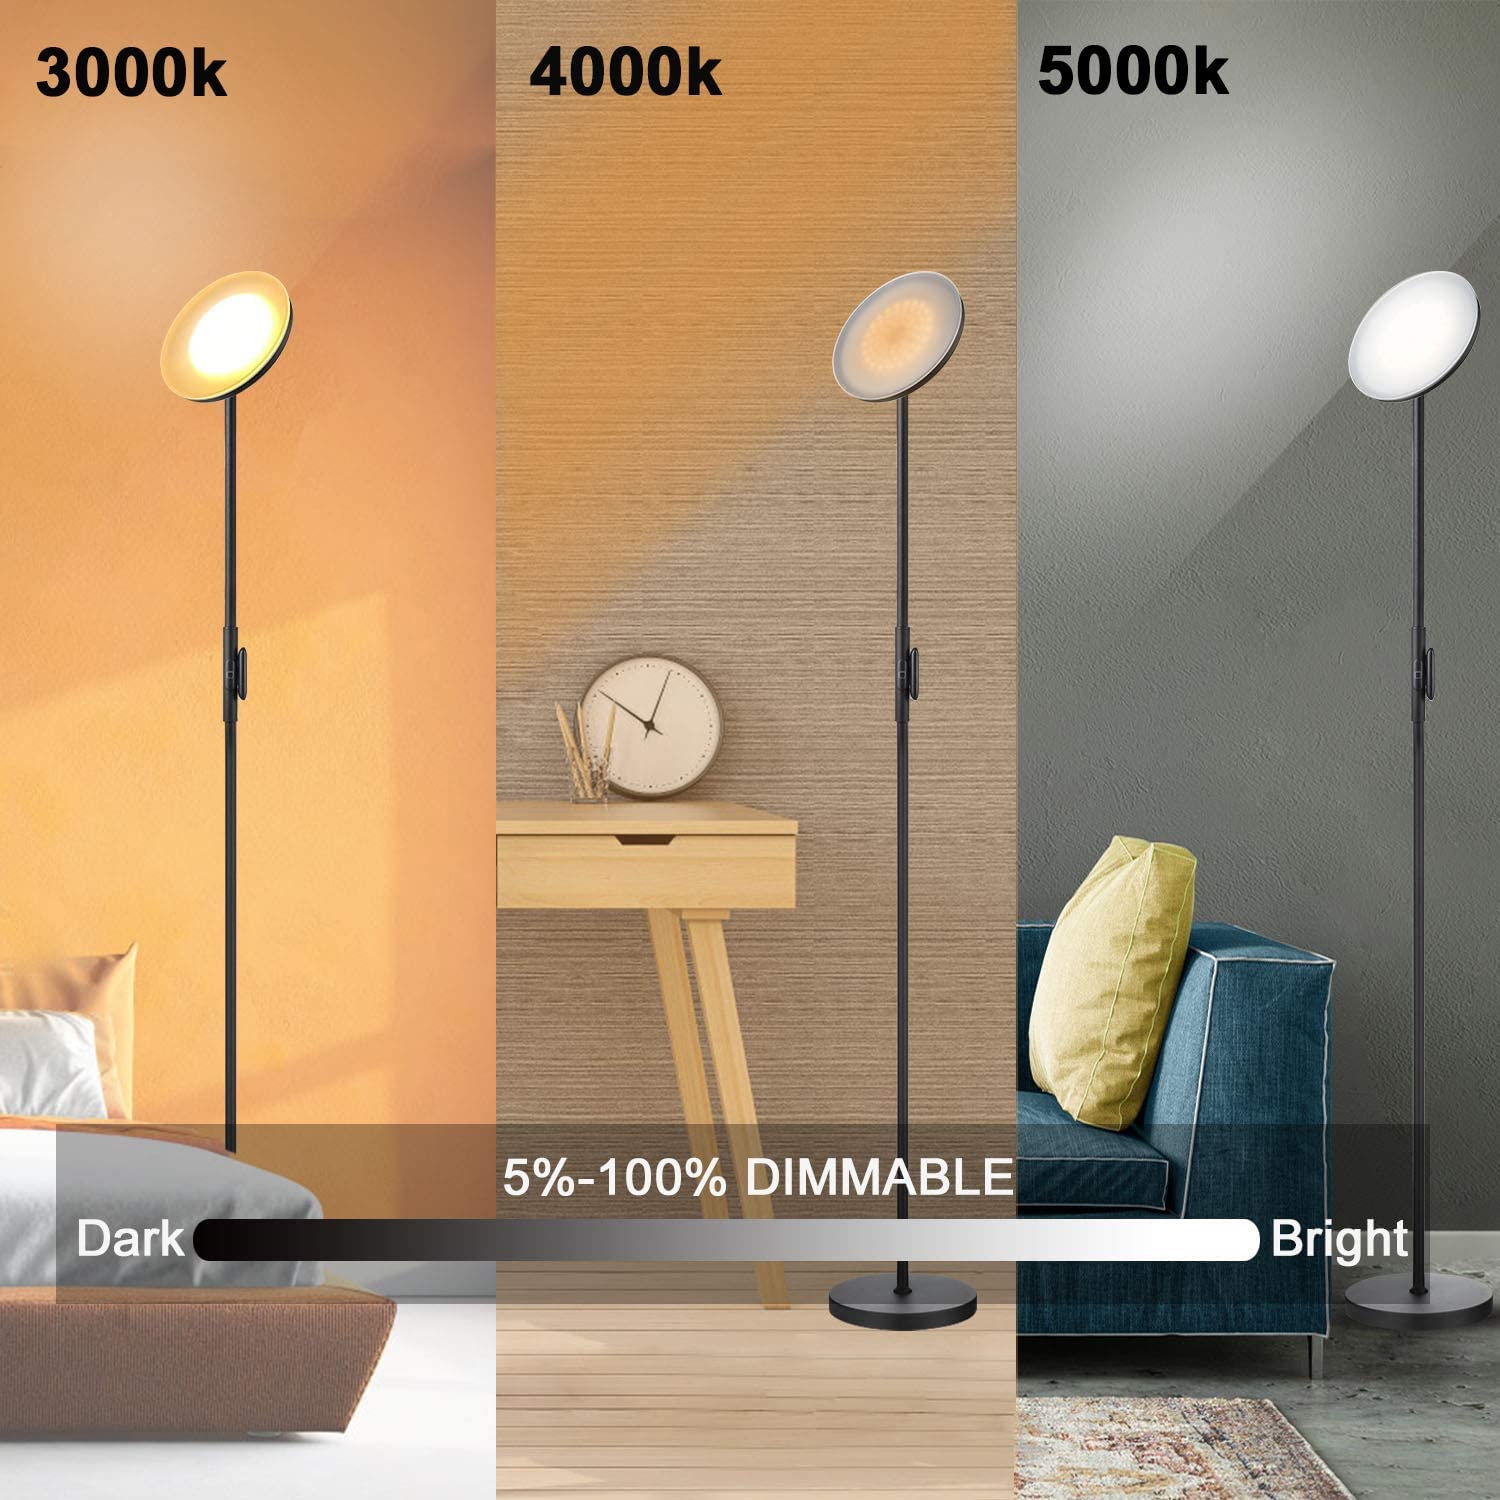 Torchlet LED Standing Lamp with Remote Control, Adjustable Color  Temperature and Brightness, Modern Floor Lamp with Fabric Shade for  Bedroom, Living Room 